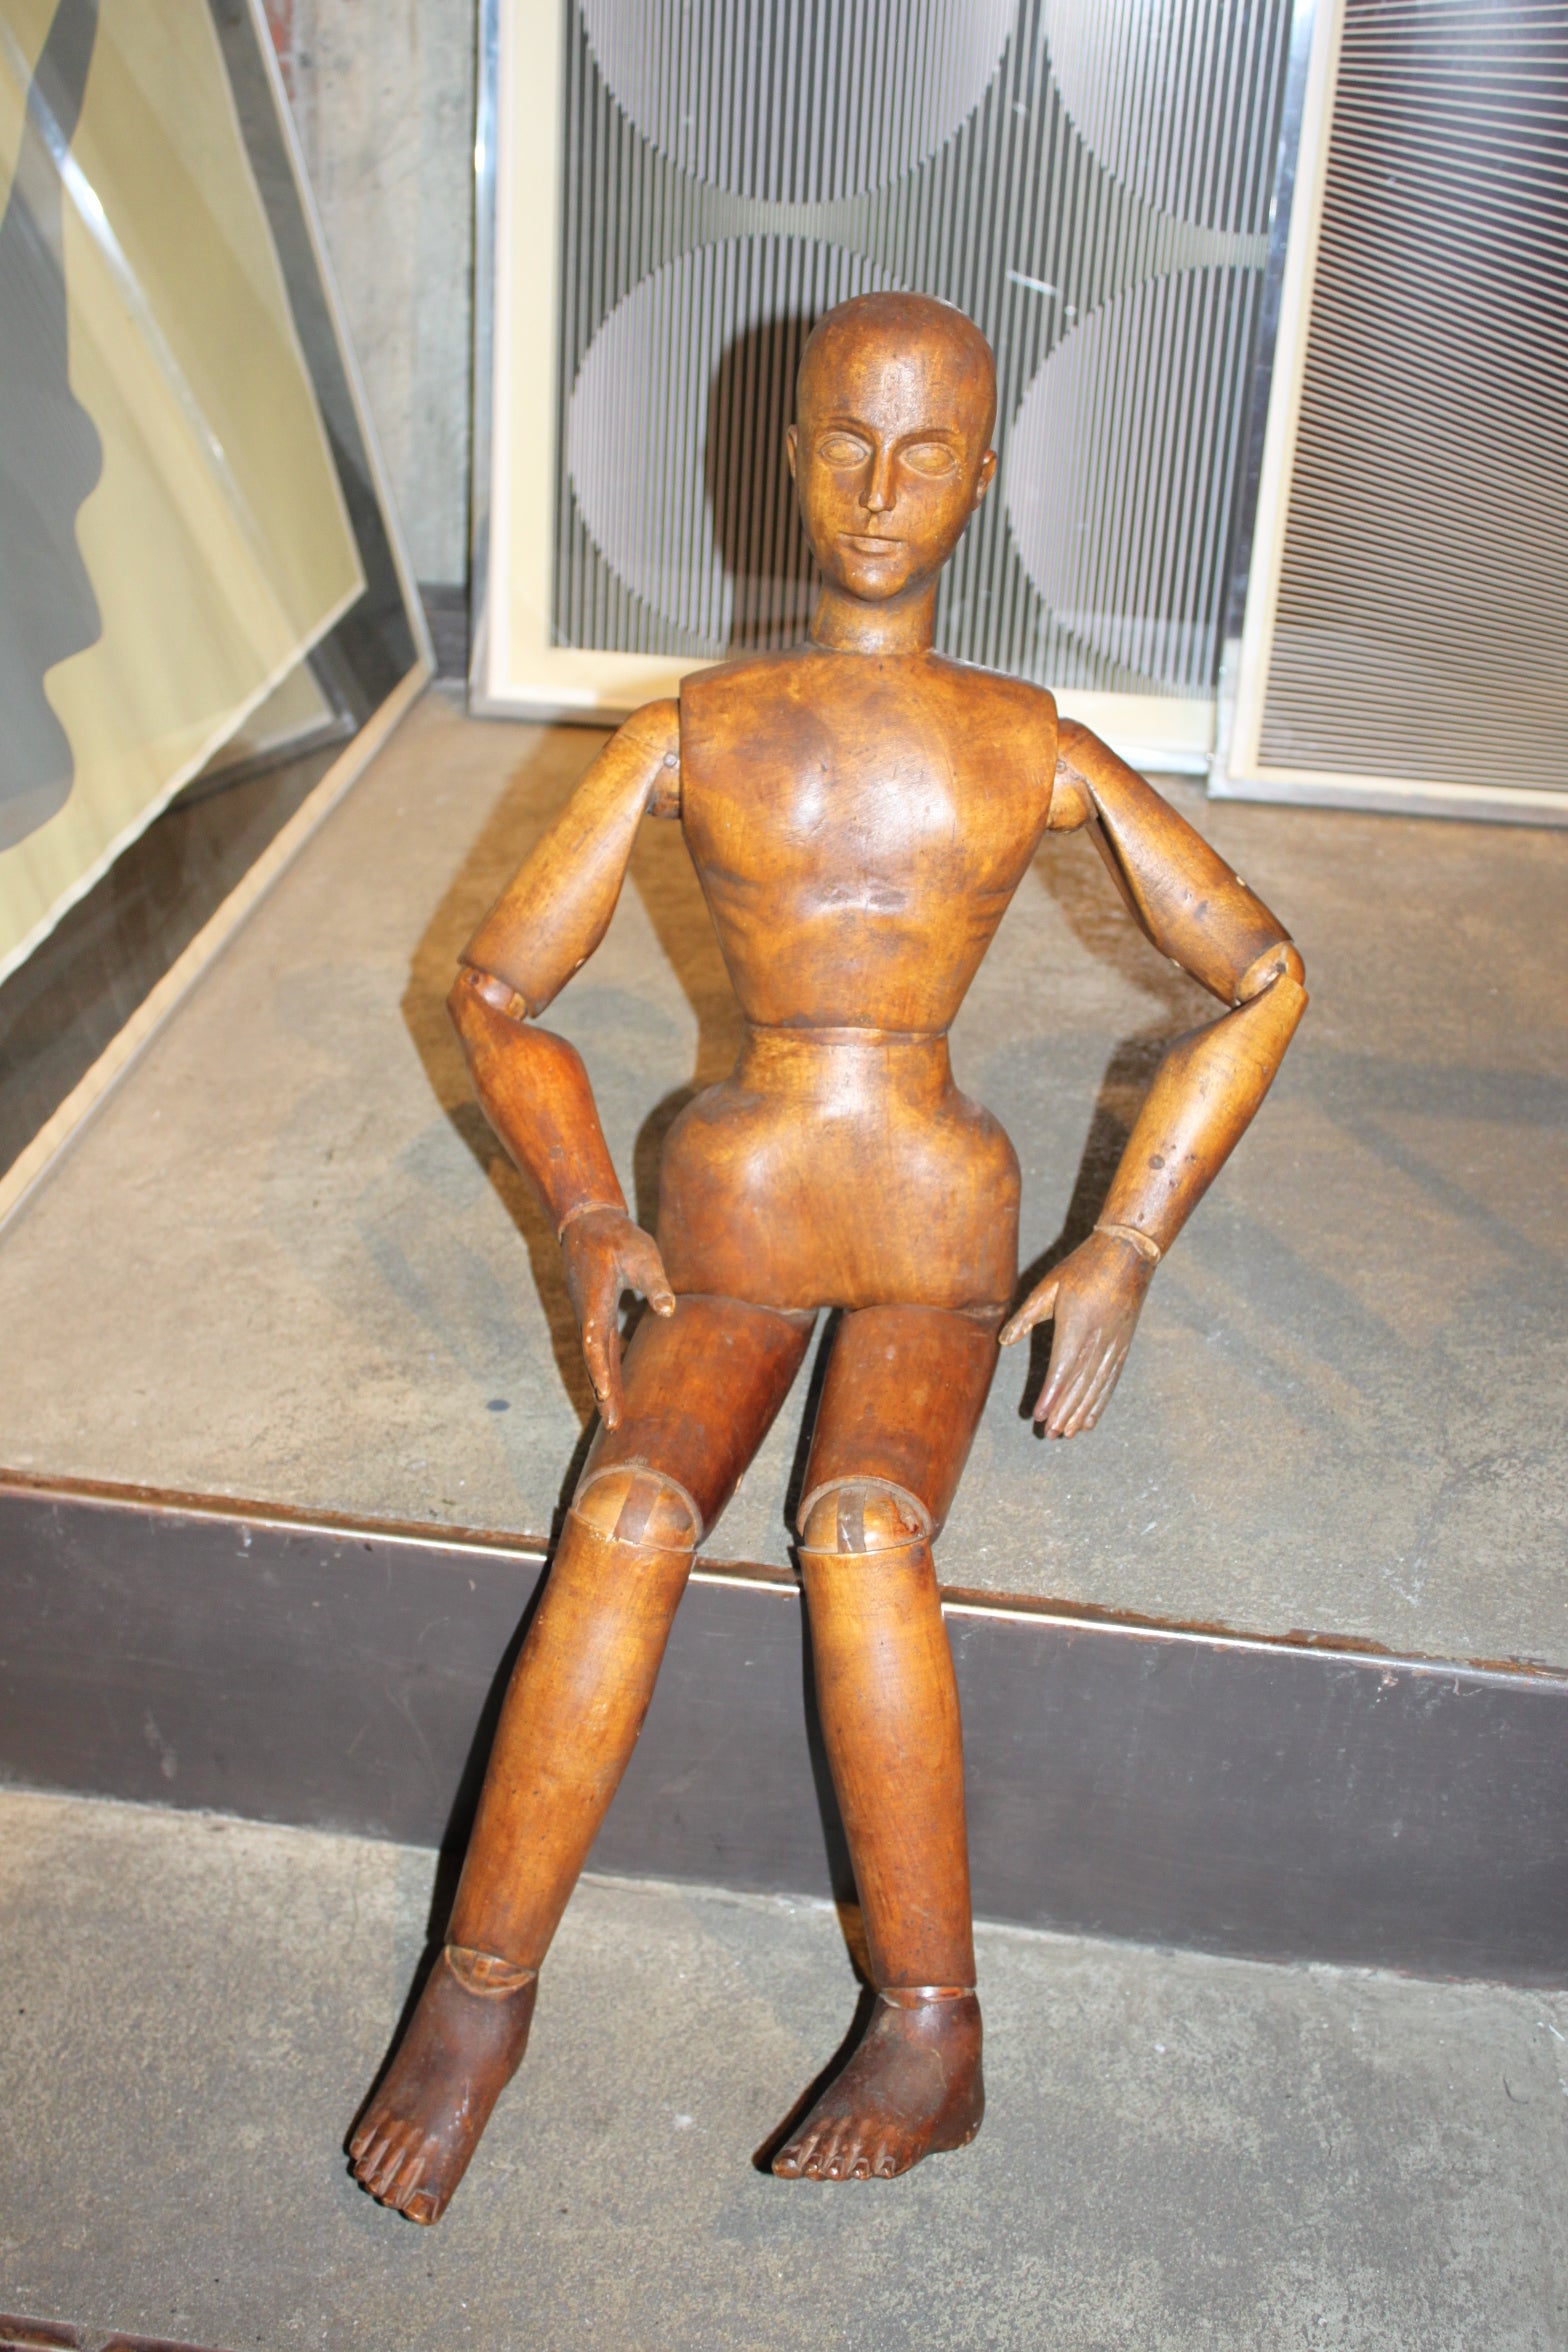 Huge 19th Century French Artist Figure For Sale